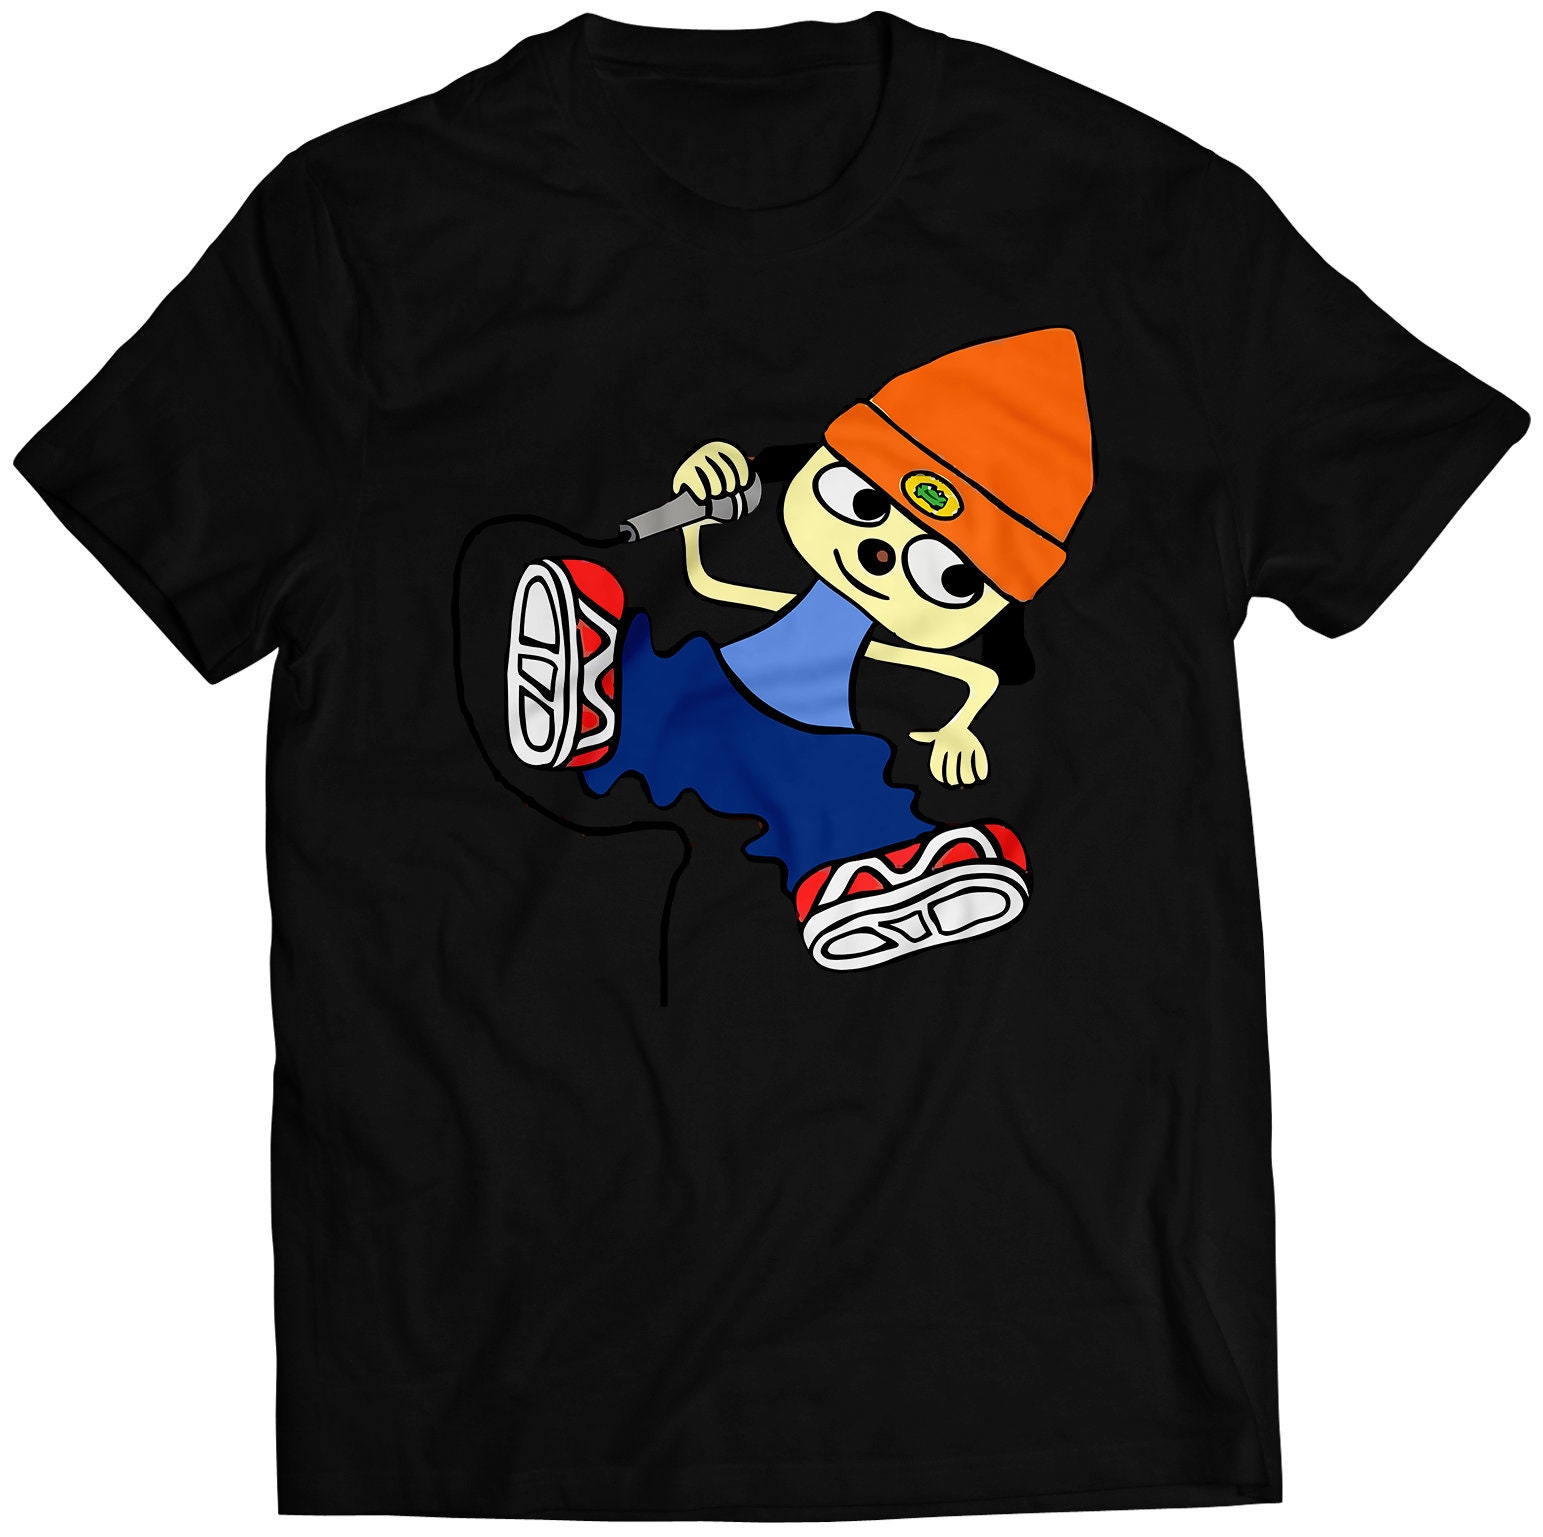 Parappa the Rapper Parappa 1.75 Enamel Pin and Magnet 